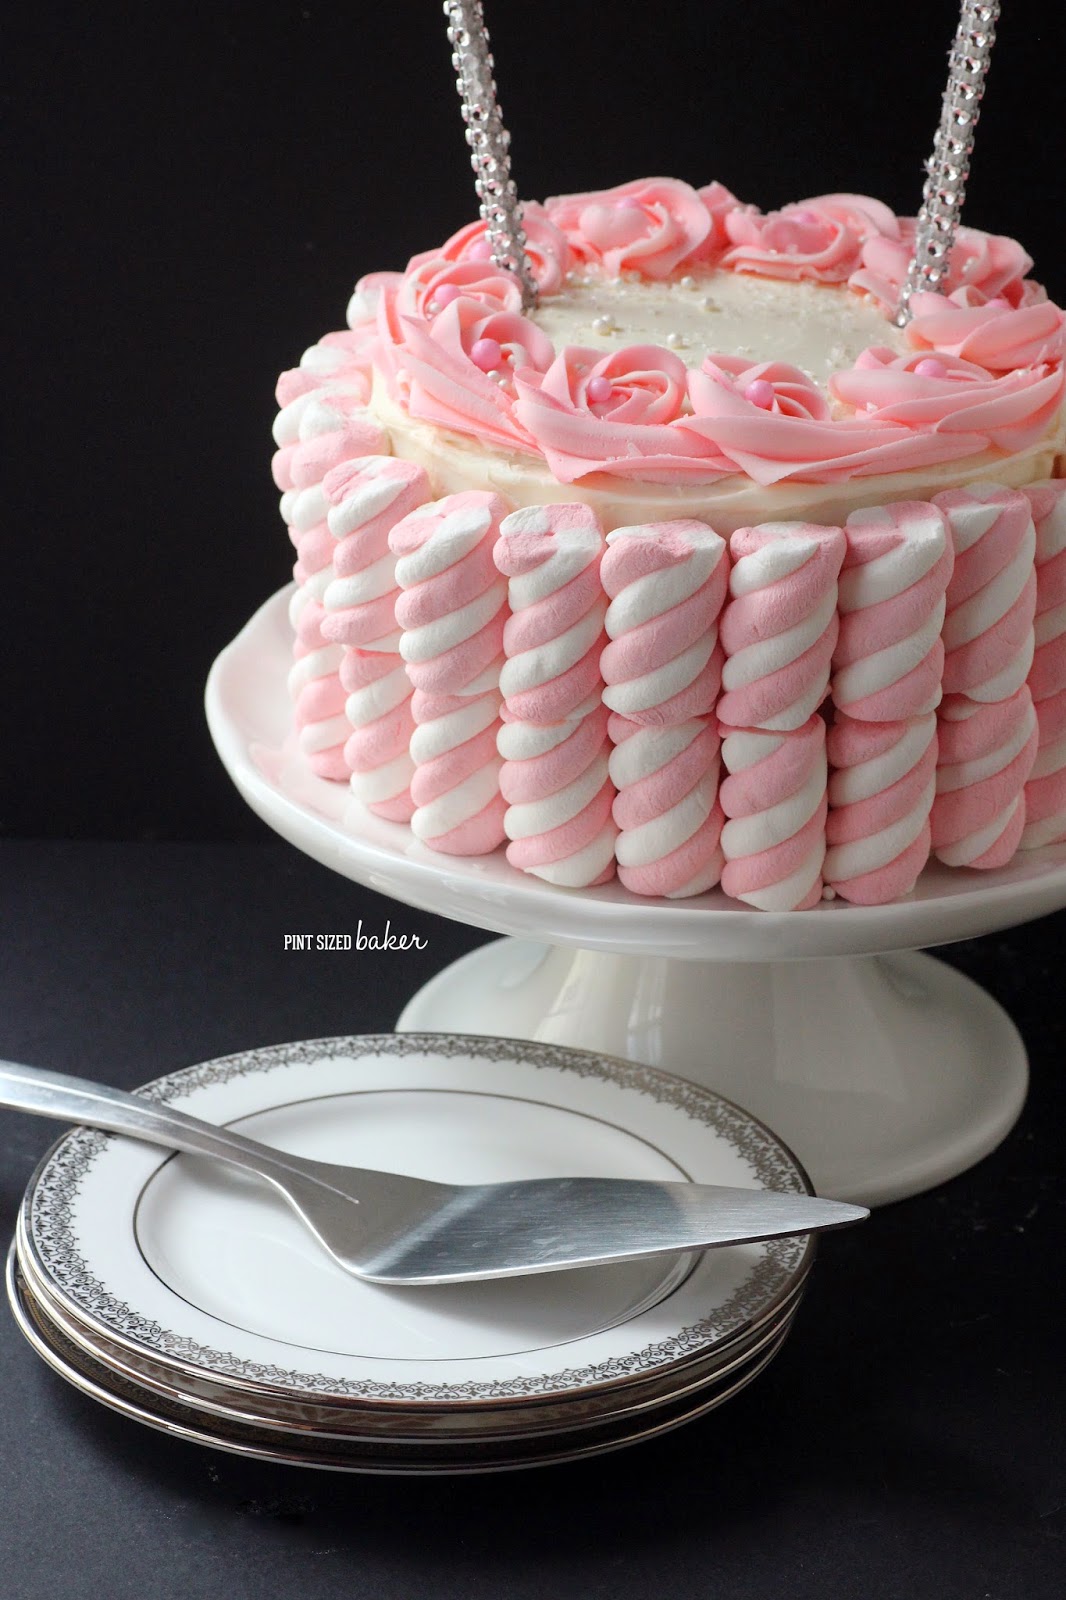 I think that this Lovable Ombre cake would look so cute at a Valentine's Day tea party! The pink layers inside would look so pretty for the party!